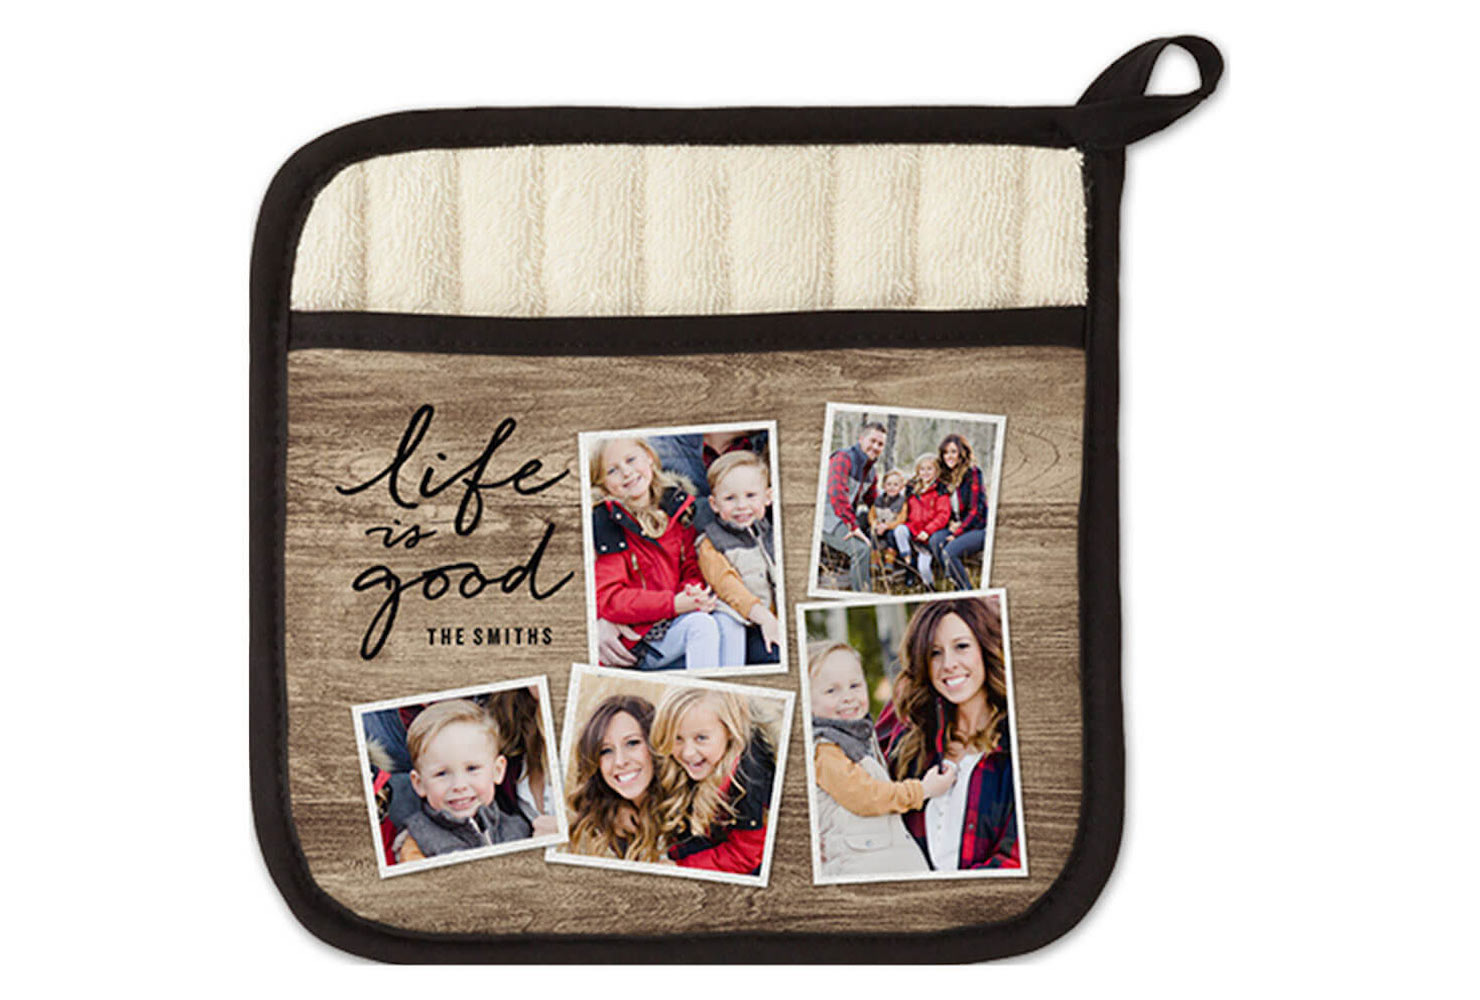 Pot holder with family photos.